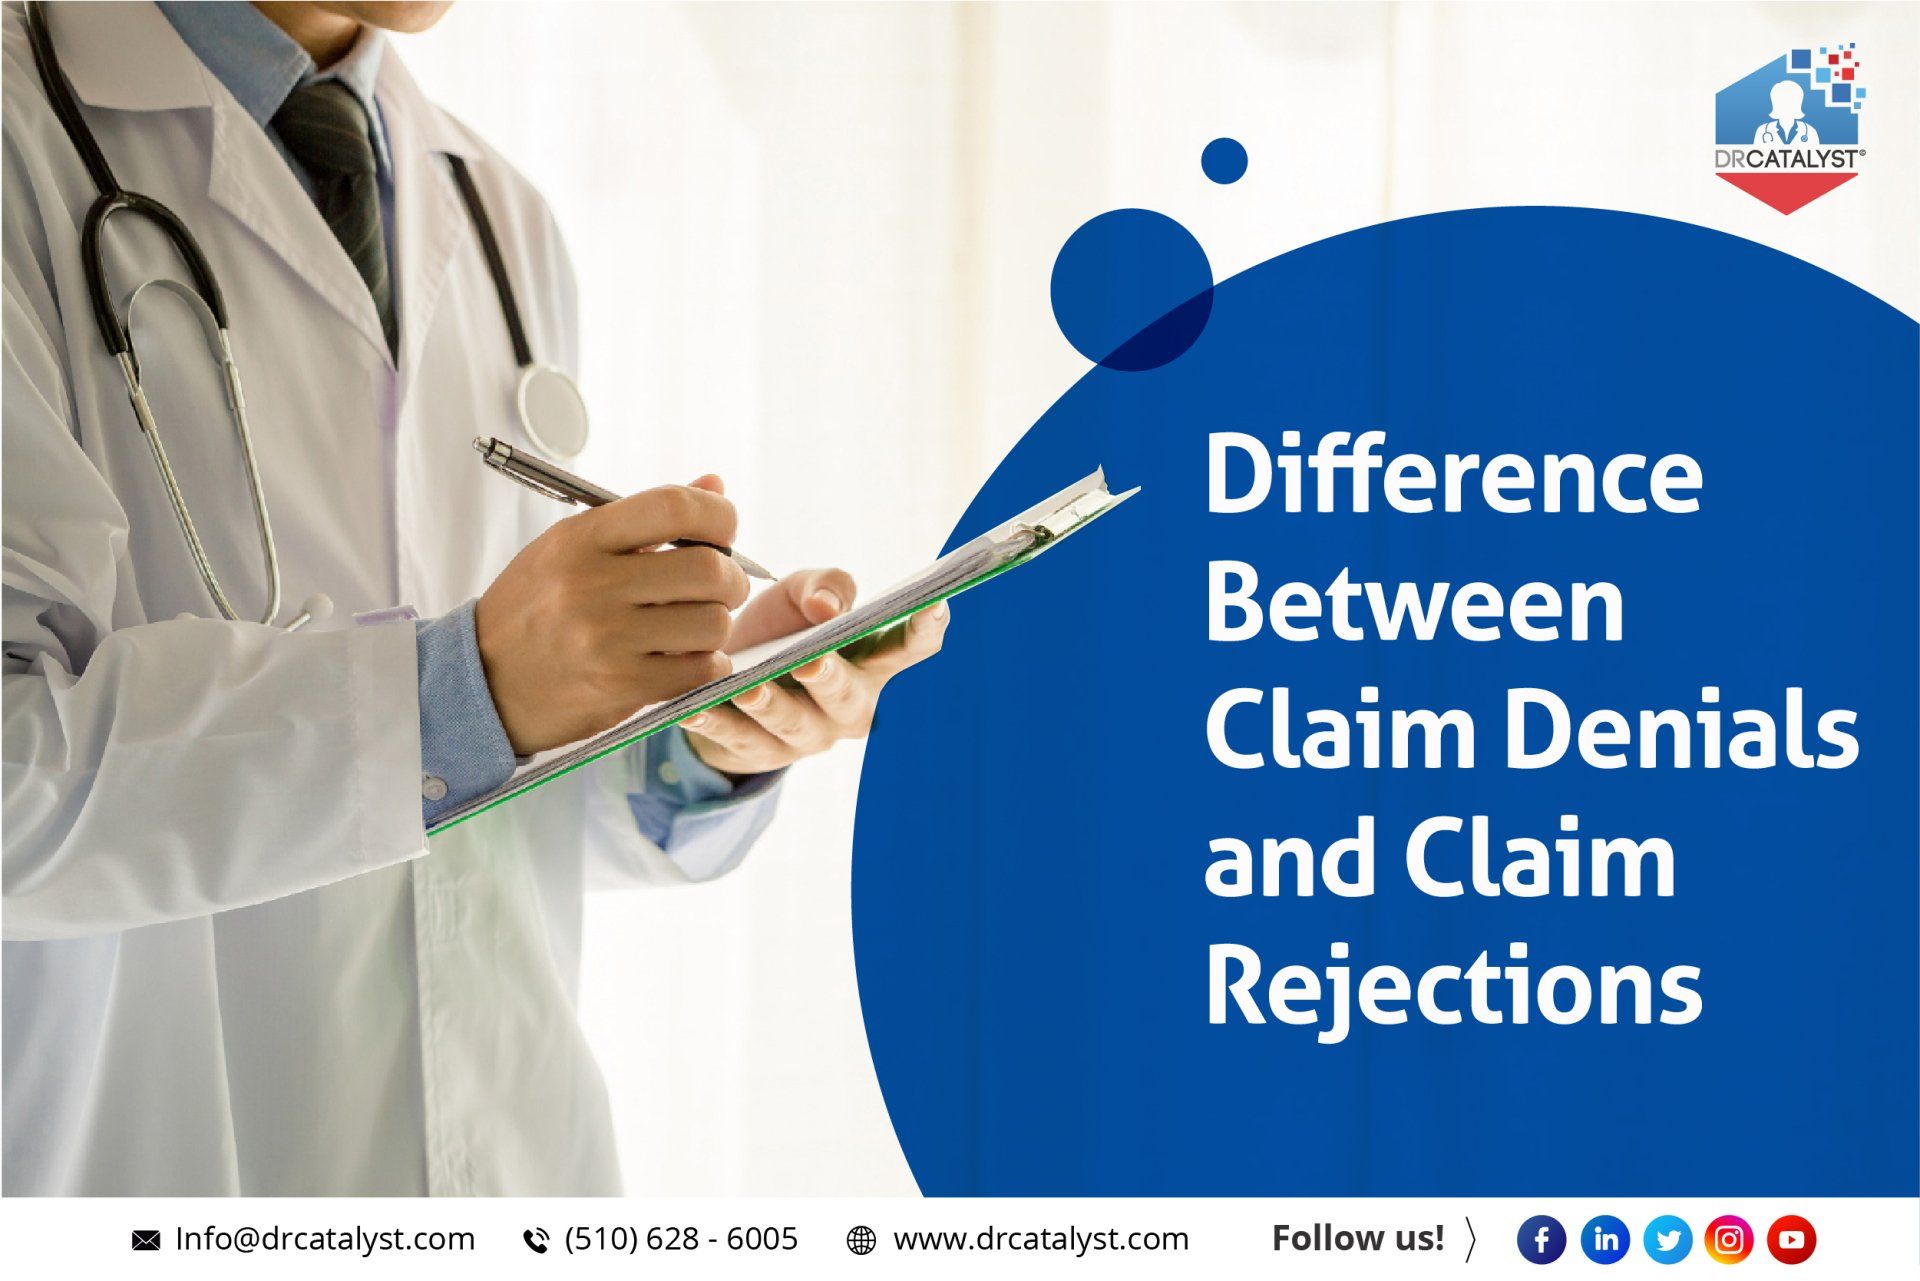 Difference between Claim Denials and Claim Rejections